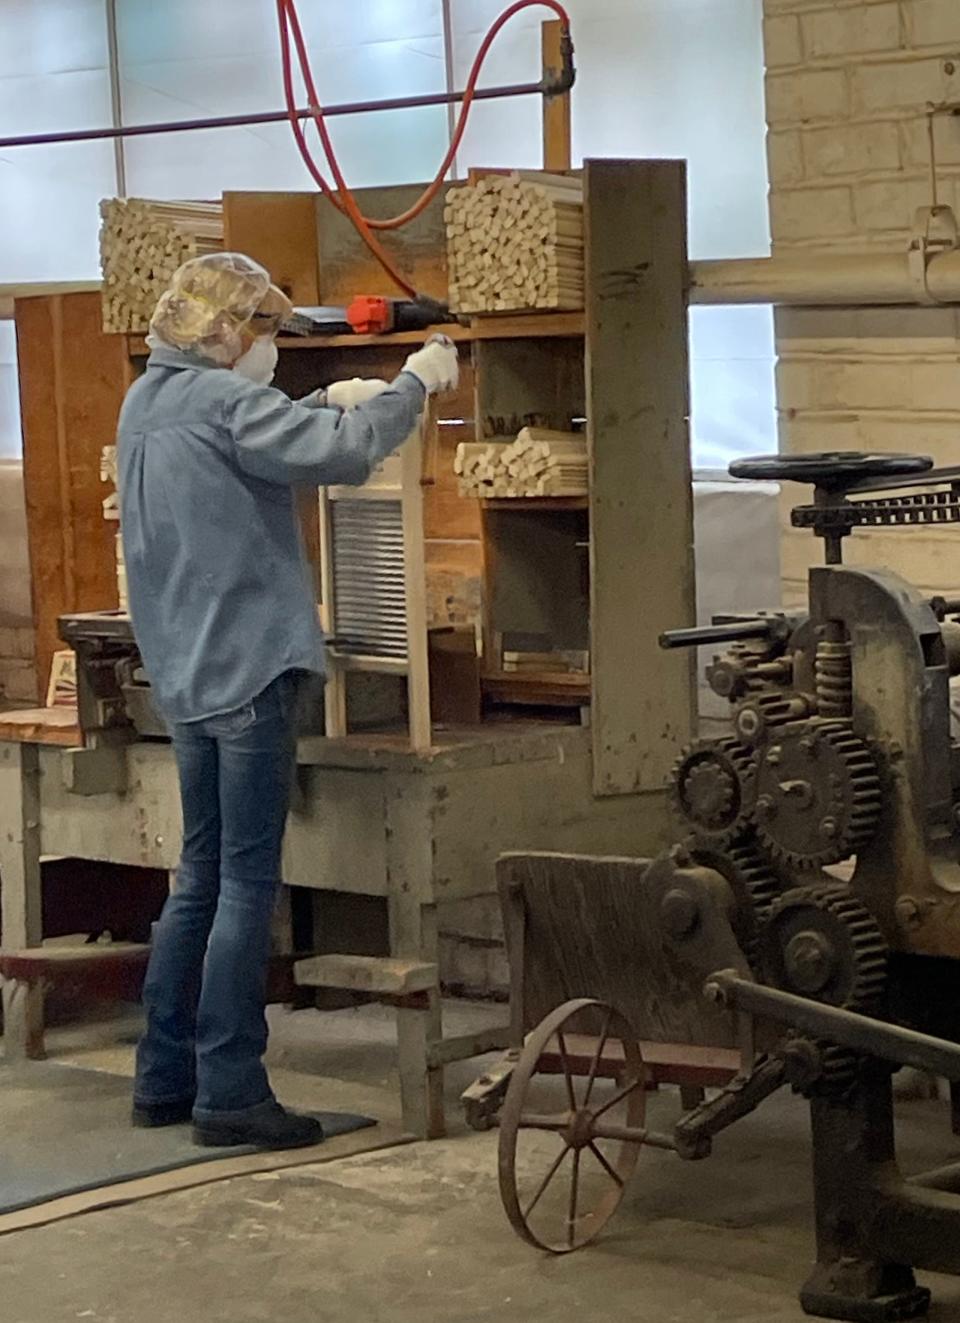 Workers at the Columbus Washboard Co. use modern tools as well as antique equipment to hand-assemble the washboards.